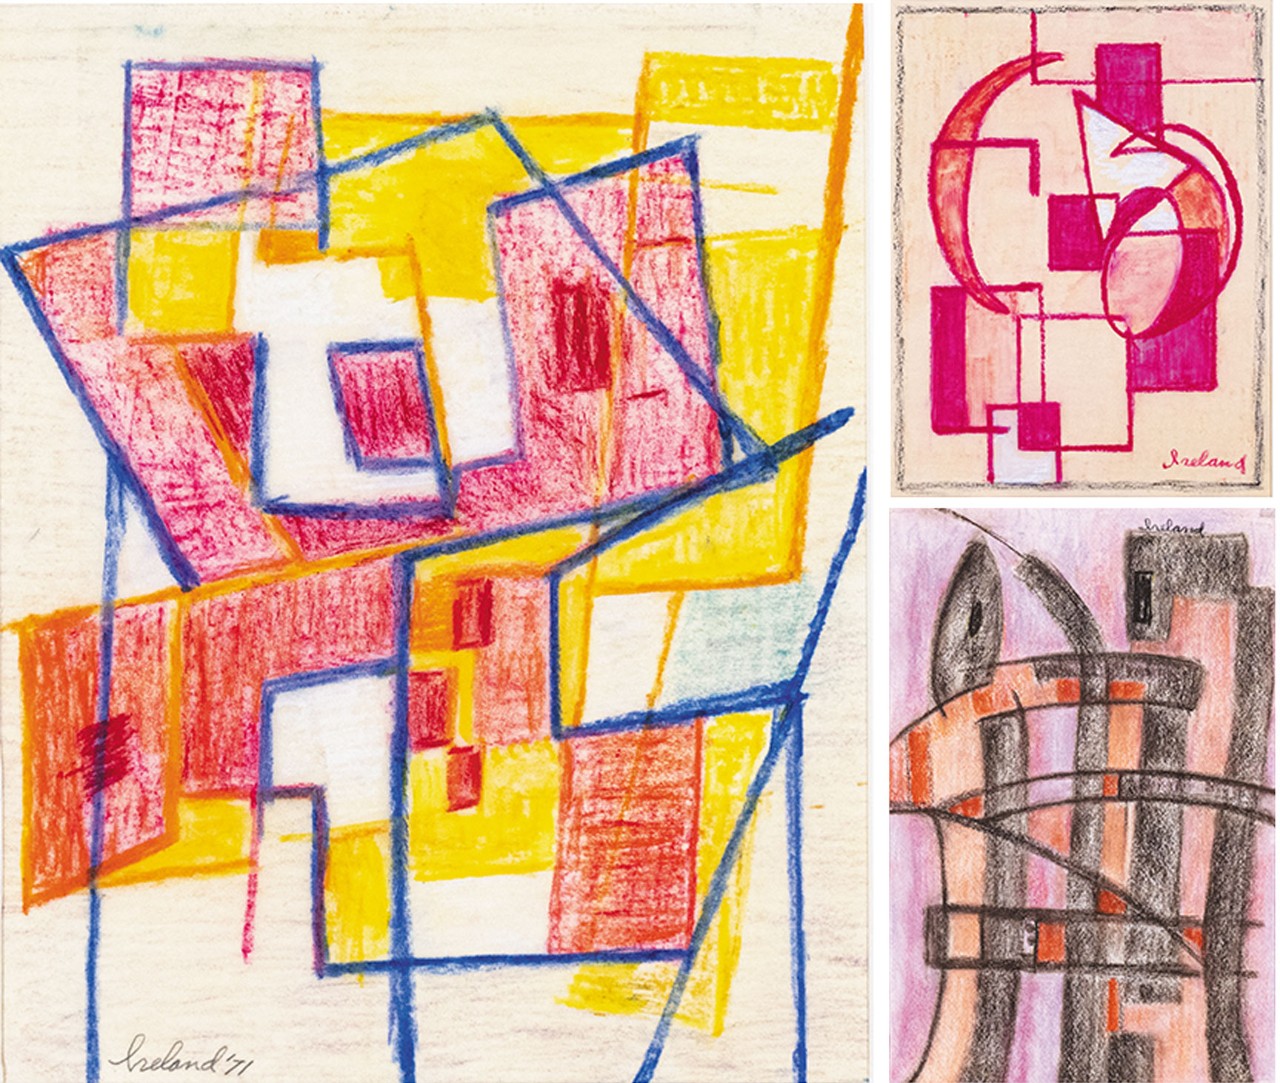 three colorful abstract sketches by Lucille Ireland